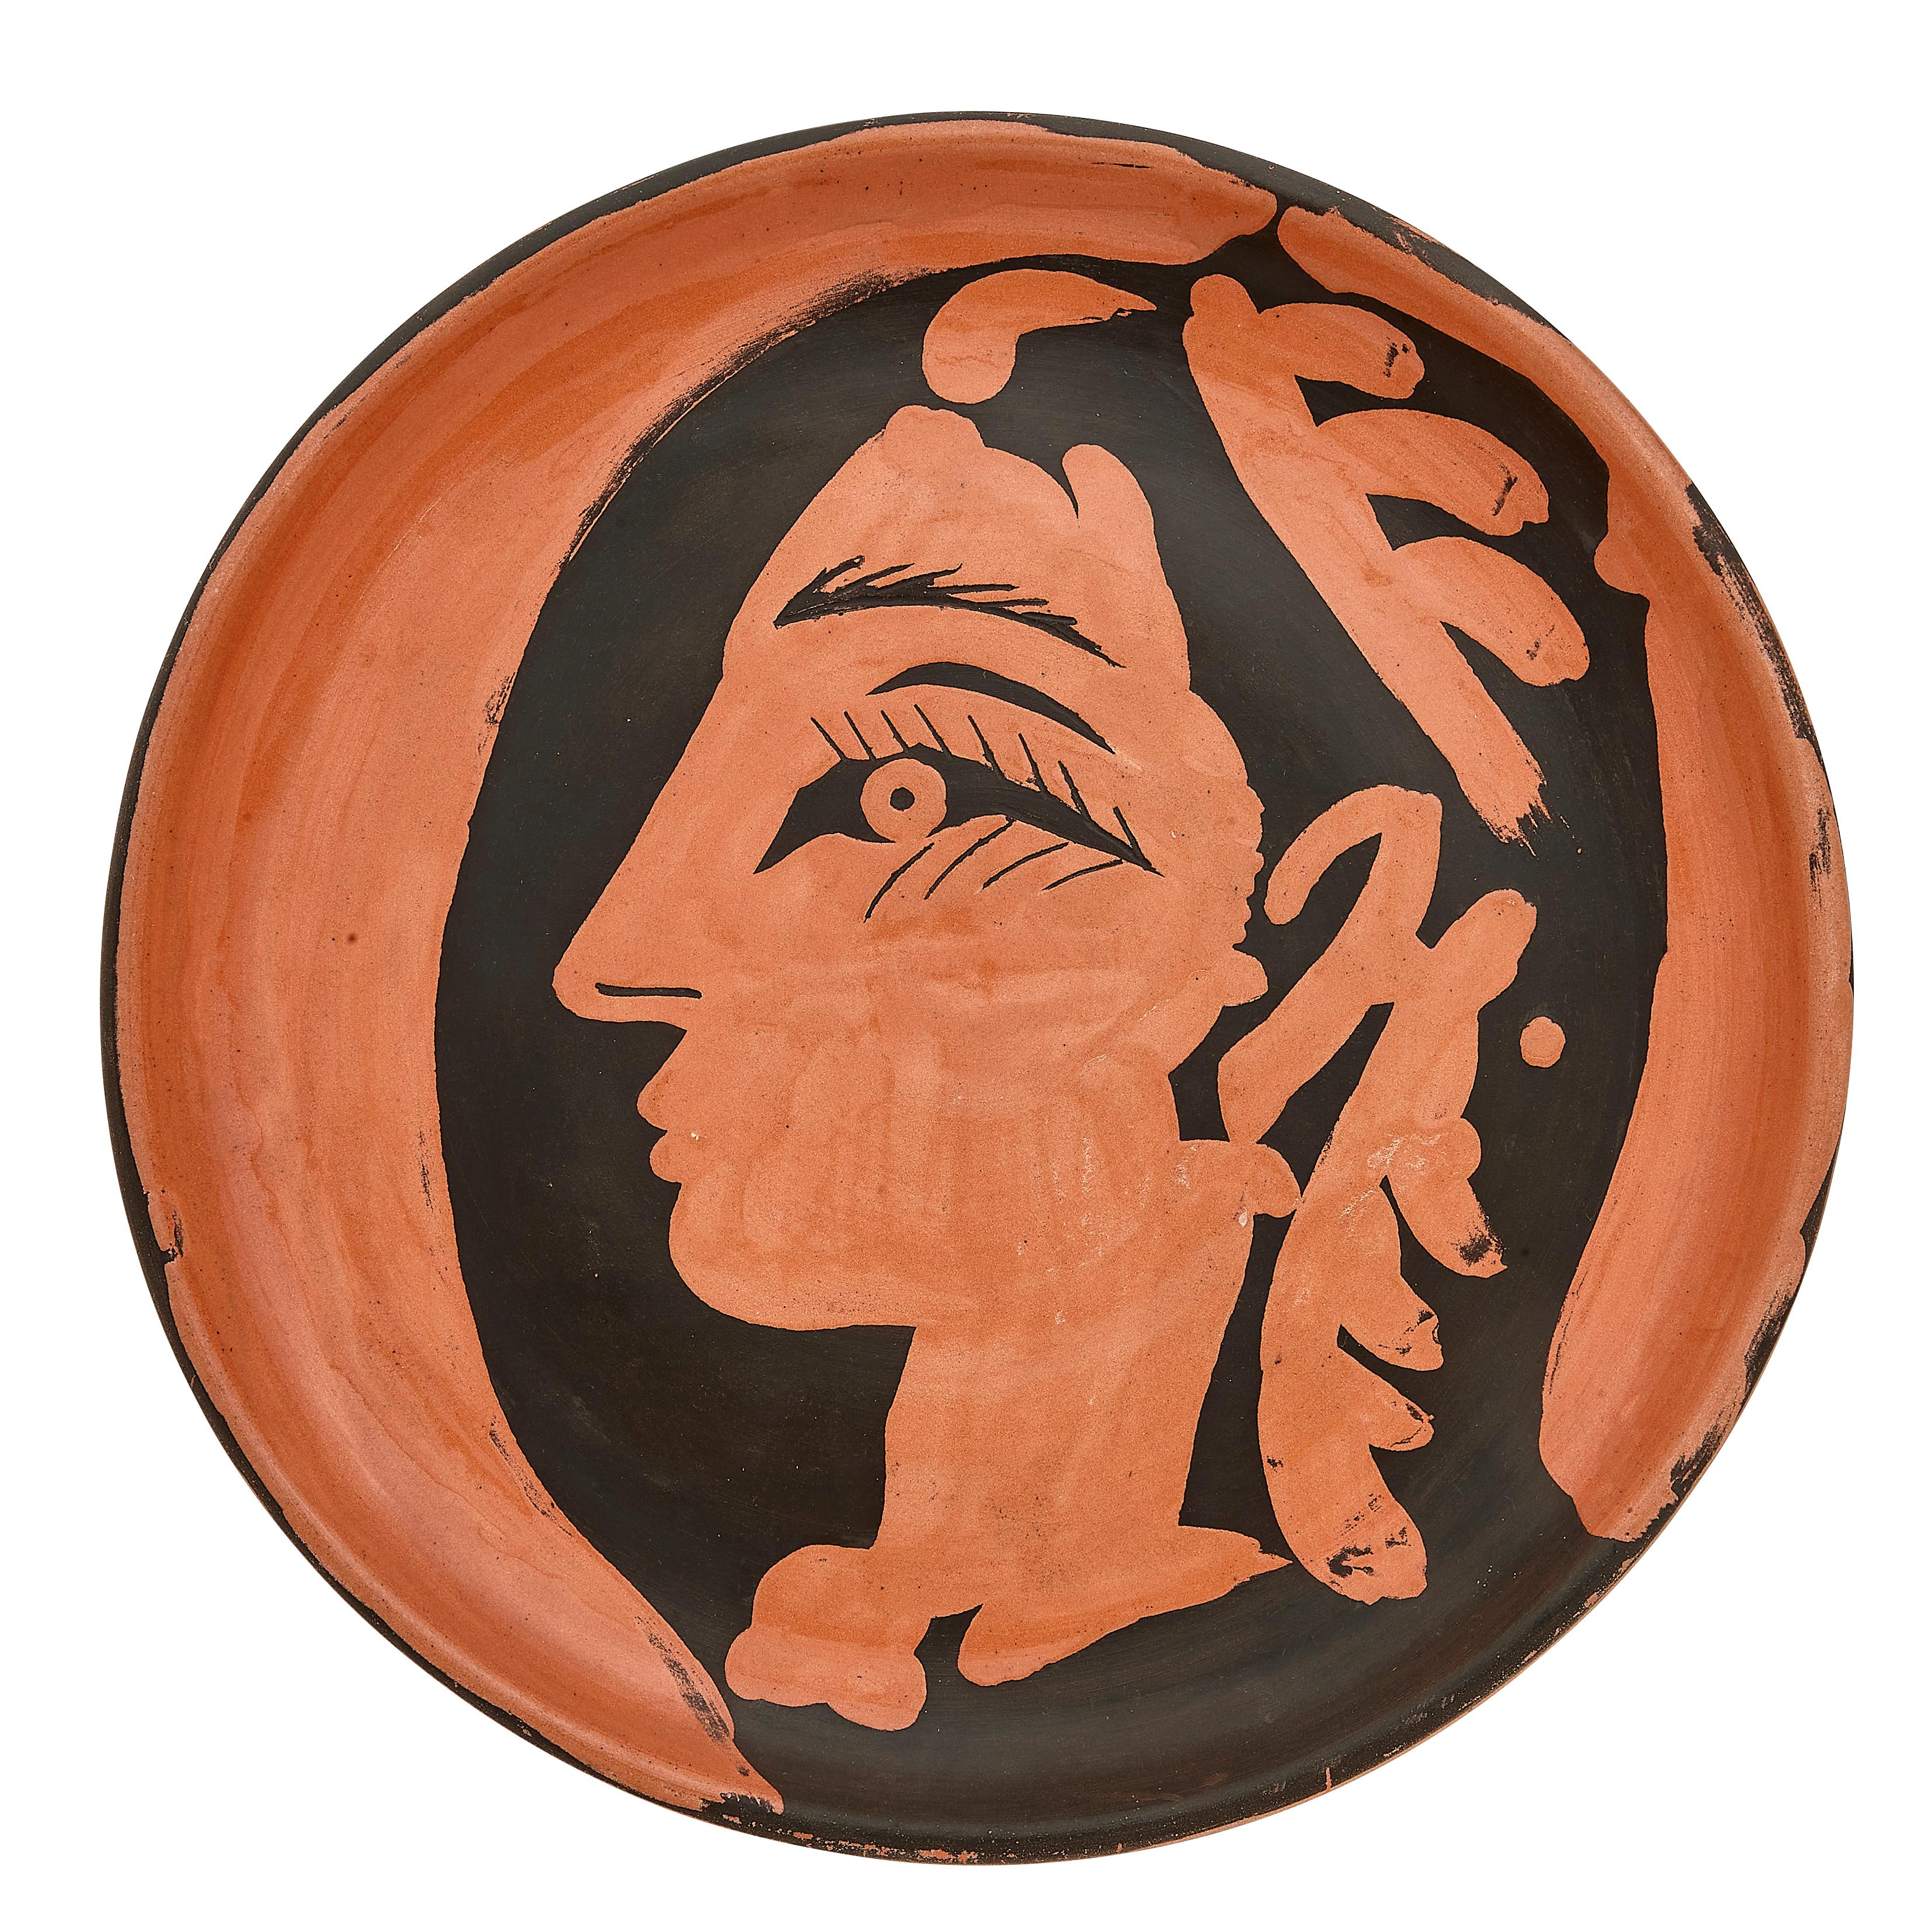 PABLO PICASSO (1881-1973) 
Profil de Jacqueline (A. R. 457) 

Terre de faïence plate, painted colors and partially glazed, 1962, numbered 83/100 and inscribed Edition Picasso, with the Edition Picasso and the Madoura stamps.
